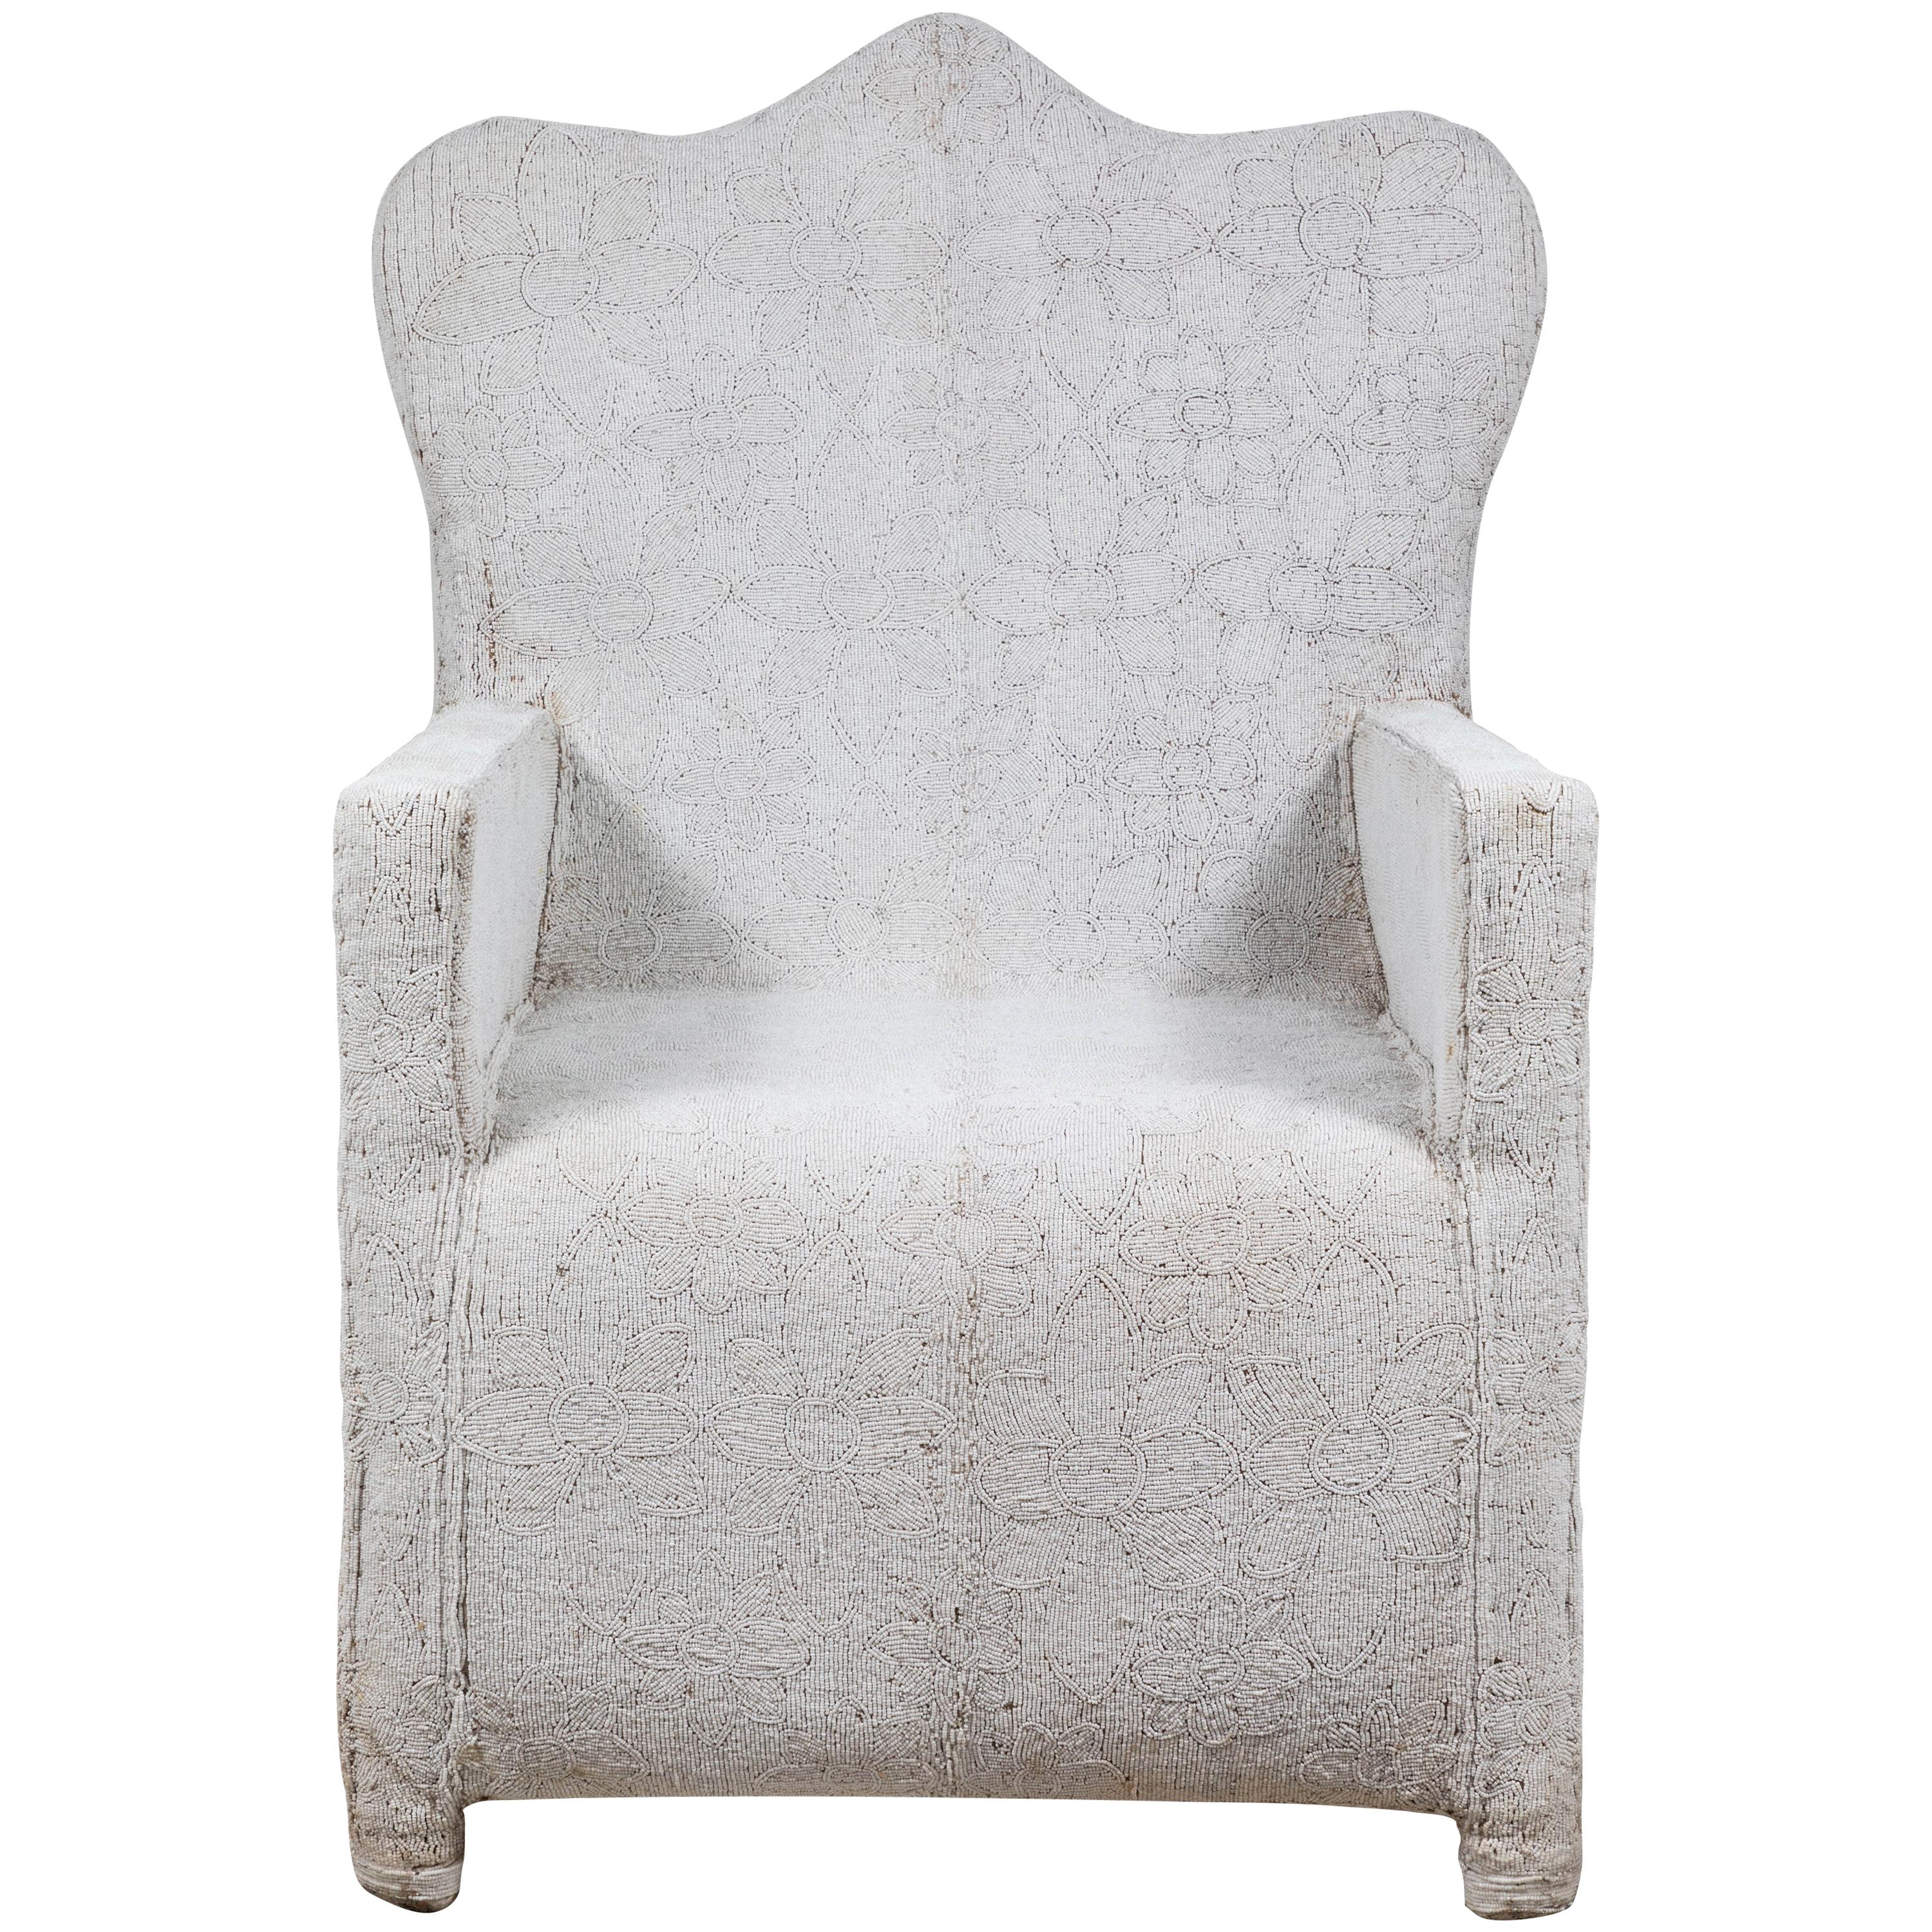 African White Beaded Chair, Nigeria, Nobility Chair